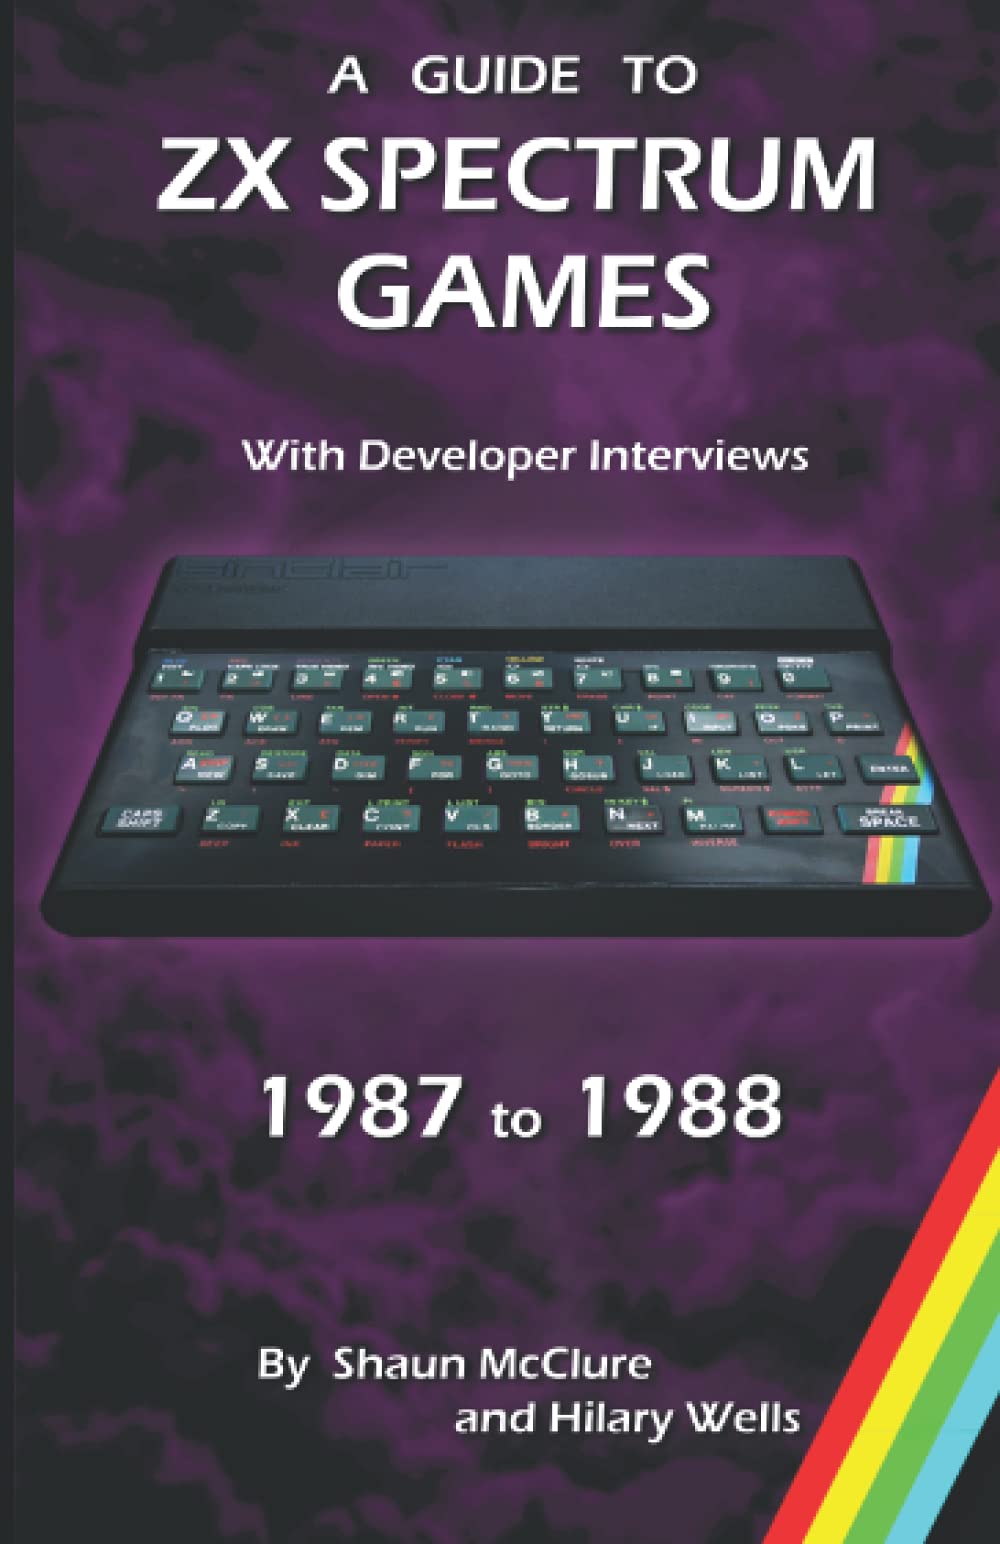 A Guide to ZX Spectrum Games - 1987 to 1988 image, screenshot or loading screen